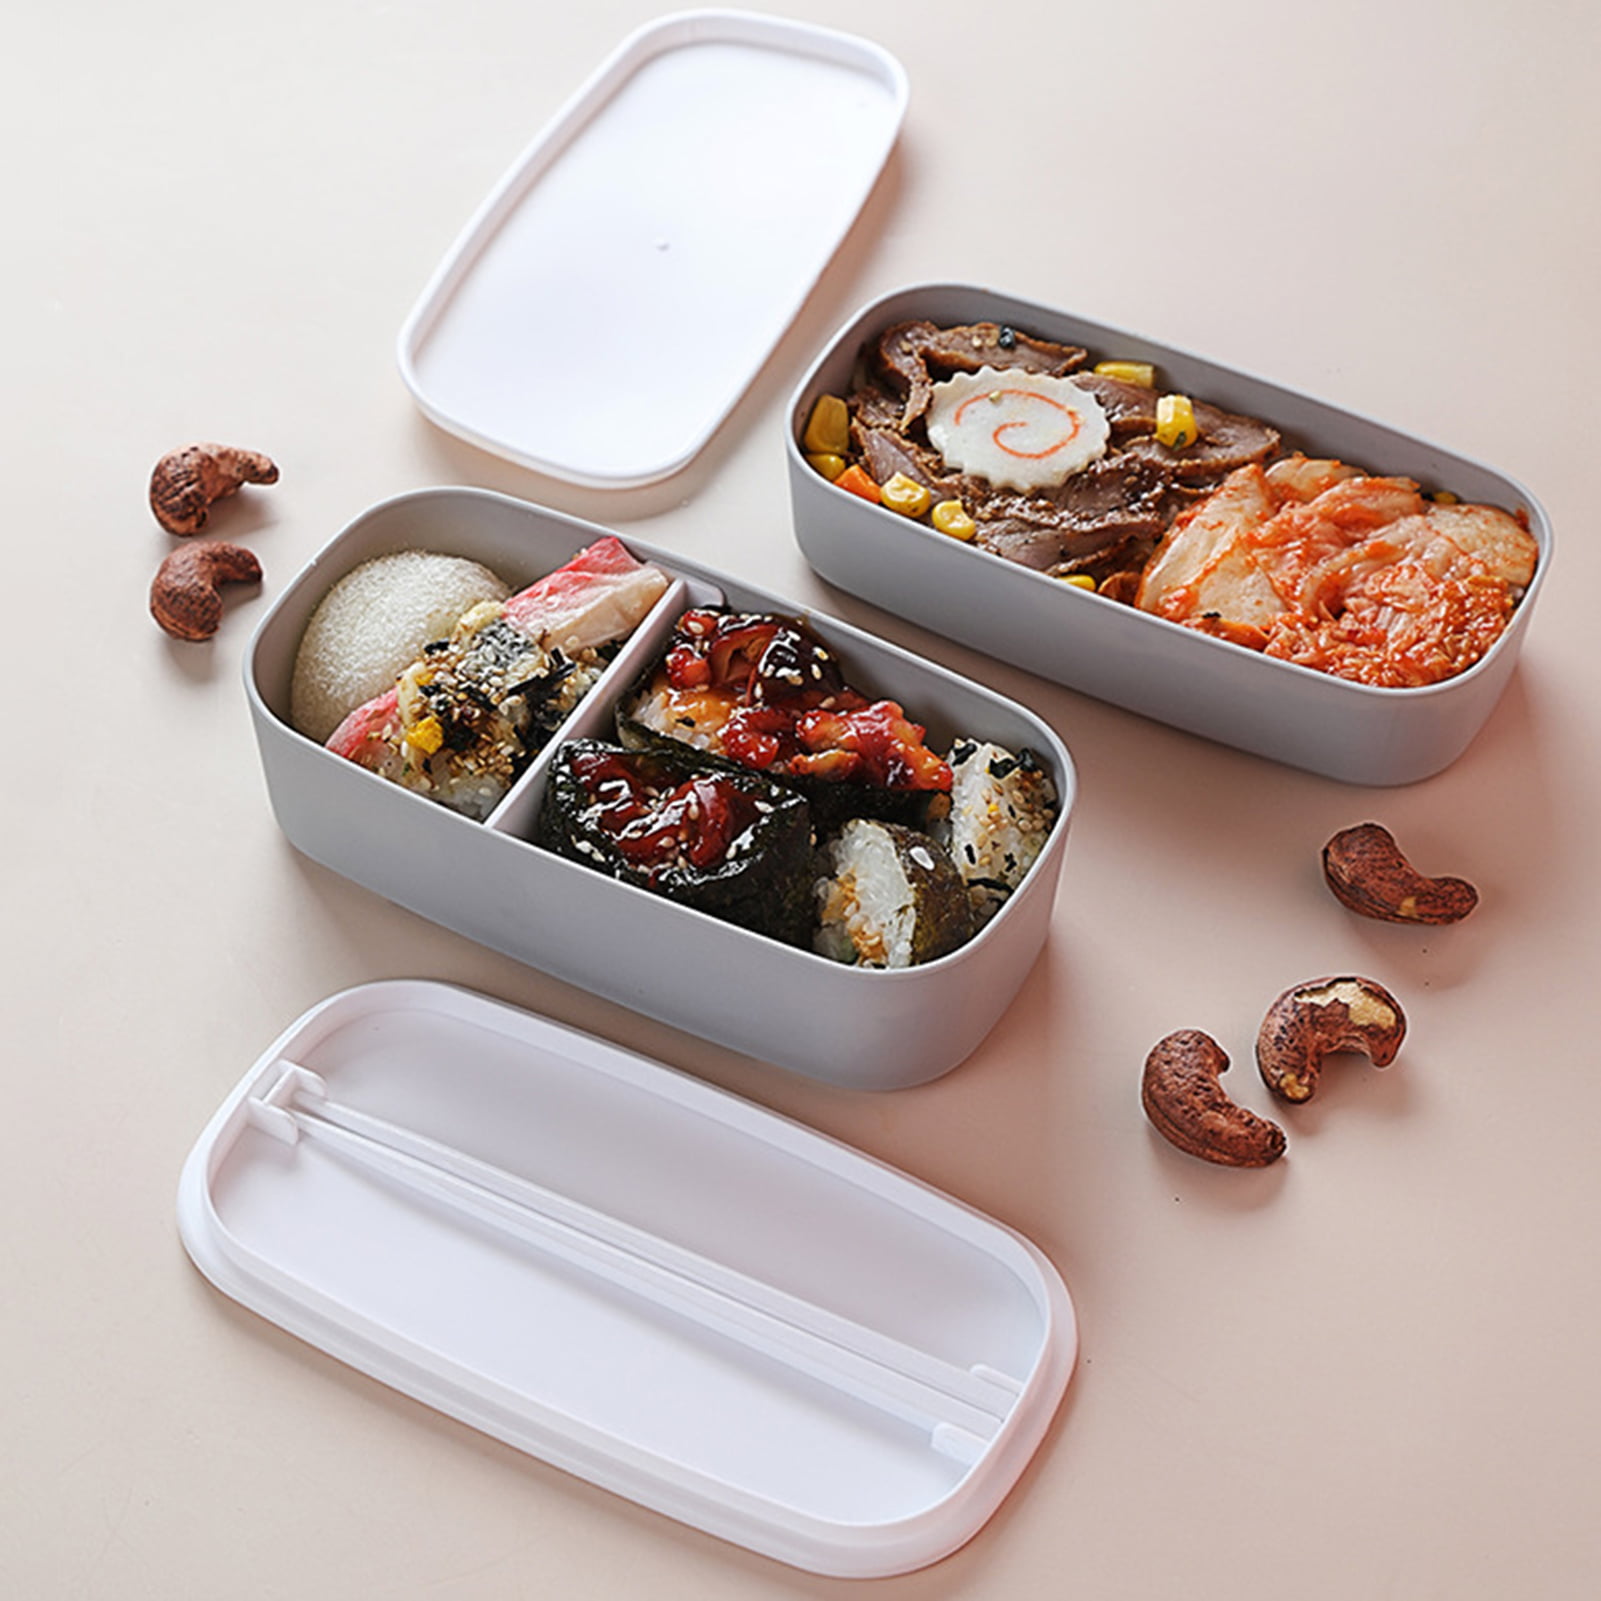 OSK Waon 2-Tier Nestable Bento Lunch Box with Chopsticks & Lunch Bag S -  Globalkitchen Japan